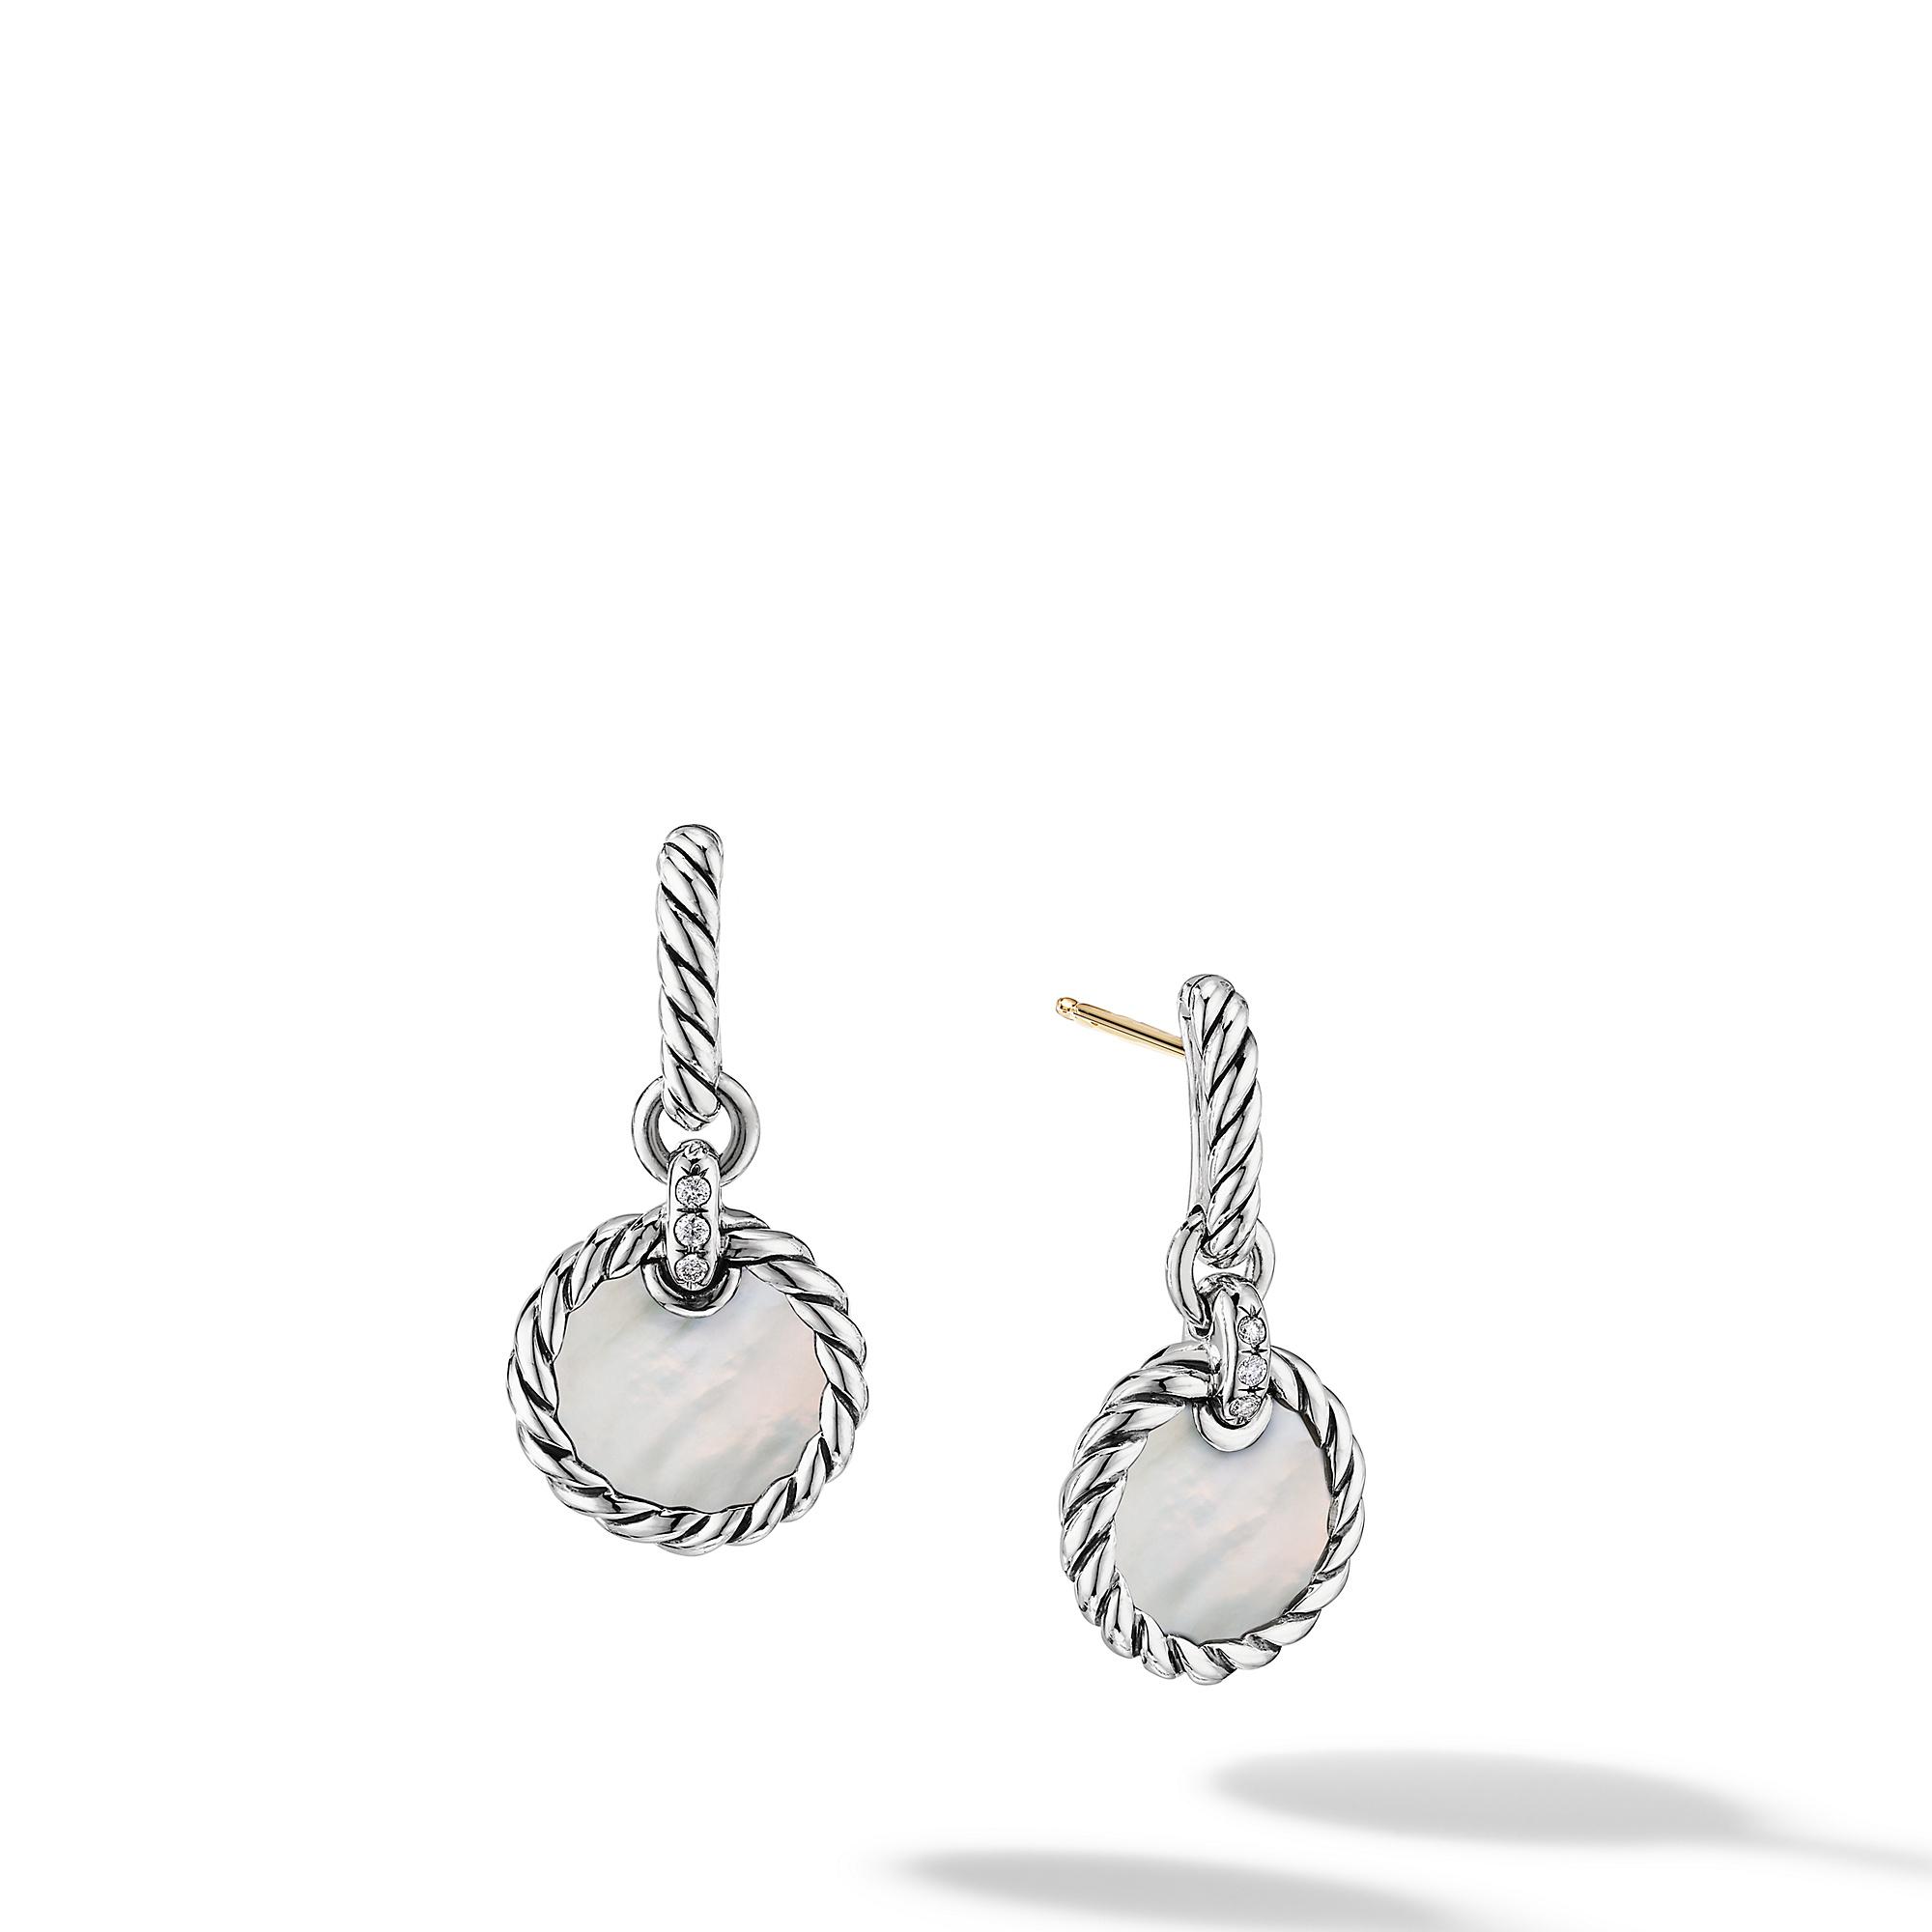 David Yurman Elements Drop Earrings with Mother Of Pearl and Pave Diamonds, 10mm